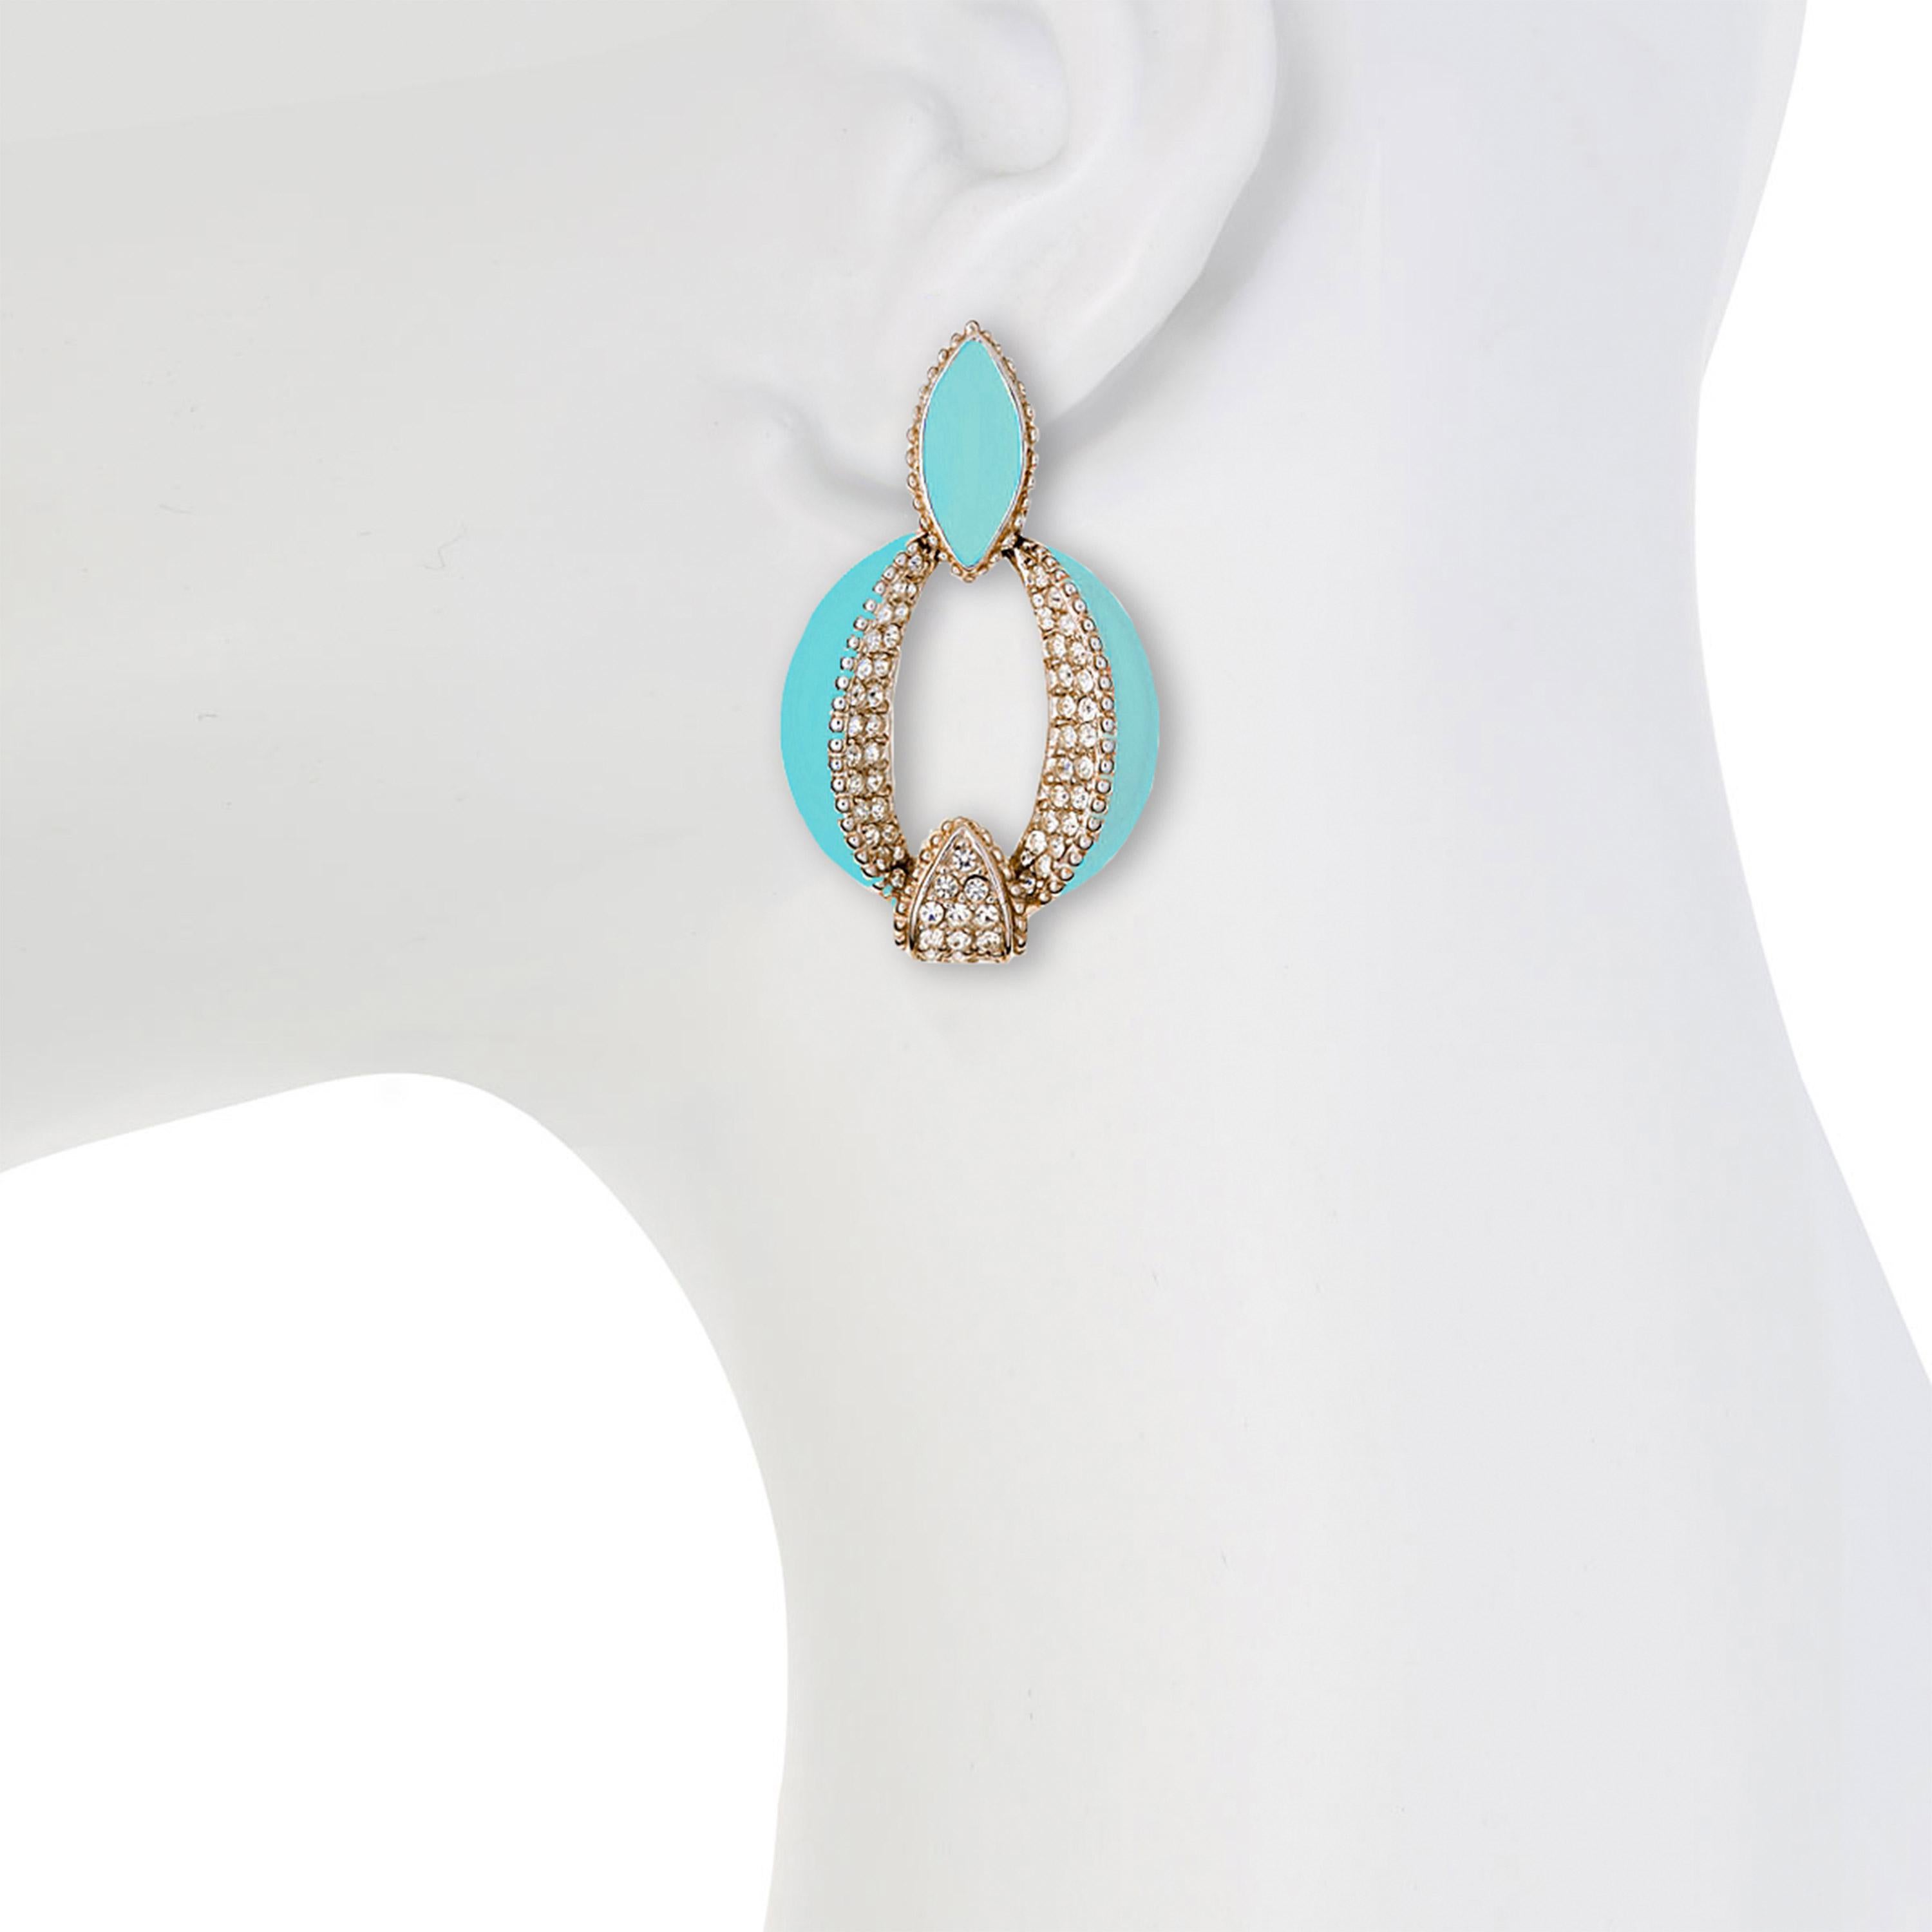 Introduced to CINER’s line in the mid 1980’s, The Turquoise Art Deco Earring is one of CINER's favorite deco pieces found in our archive. With captivating crystal rhinestones and gorgeously hand applied turquoise enamel, these earrings are a